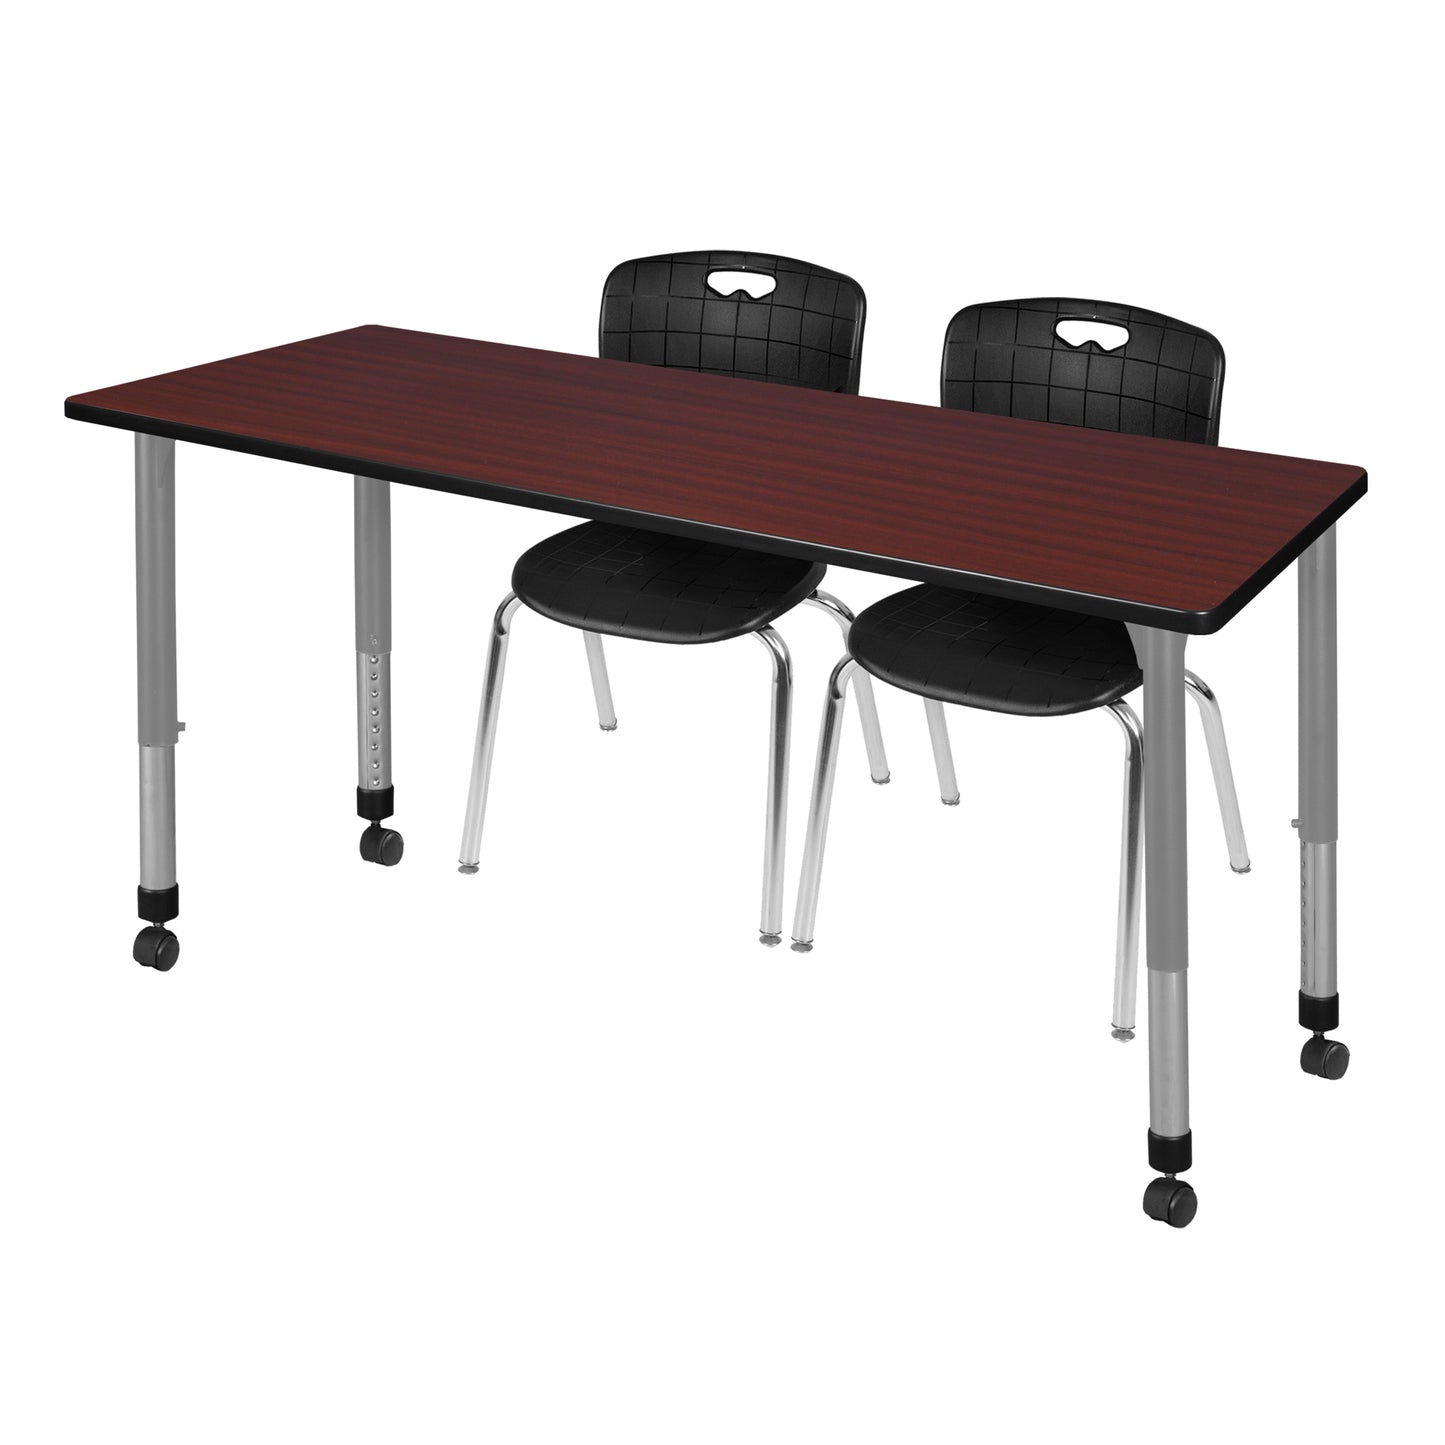 Regency Kee 60 x 24 in. Adjustable Classroom Table- Cherry & 2 Andy 18 in. Stack Chairs